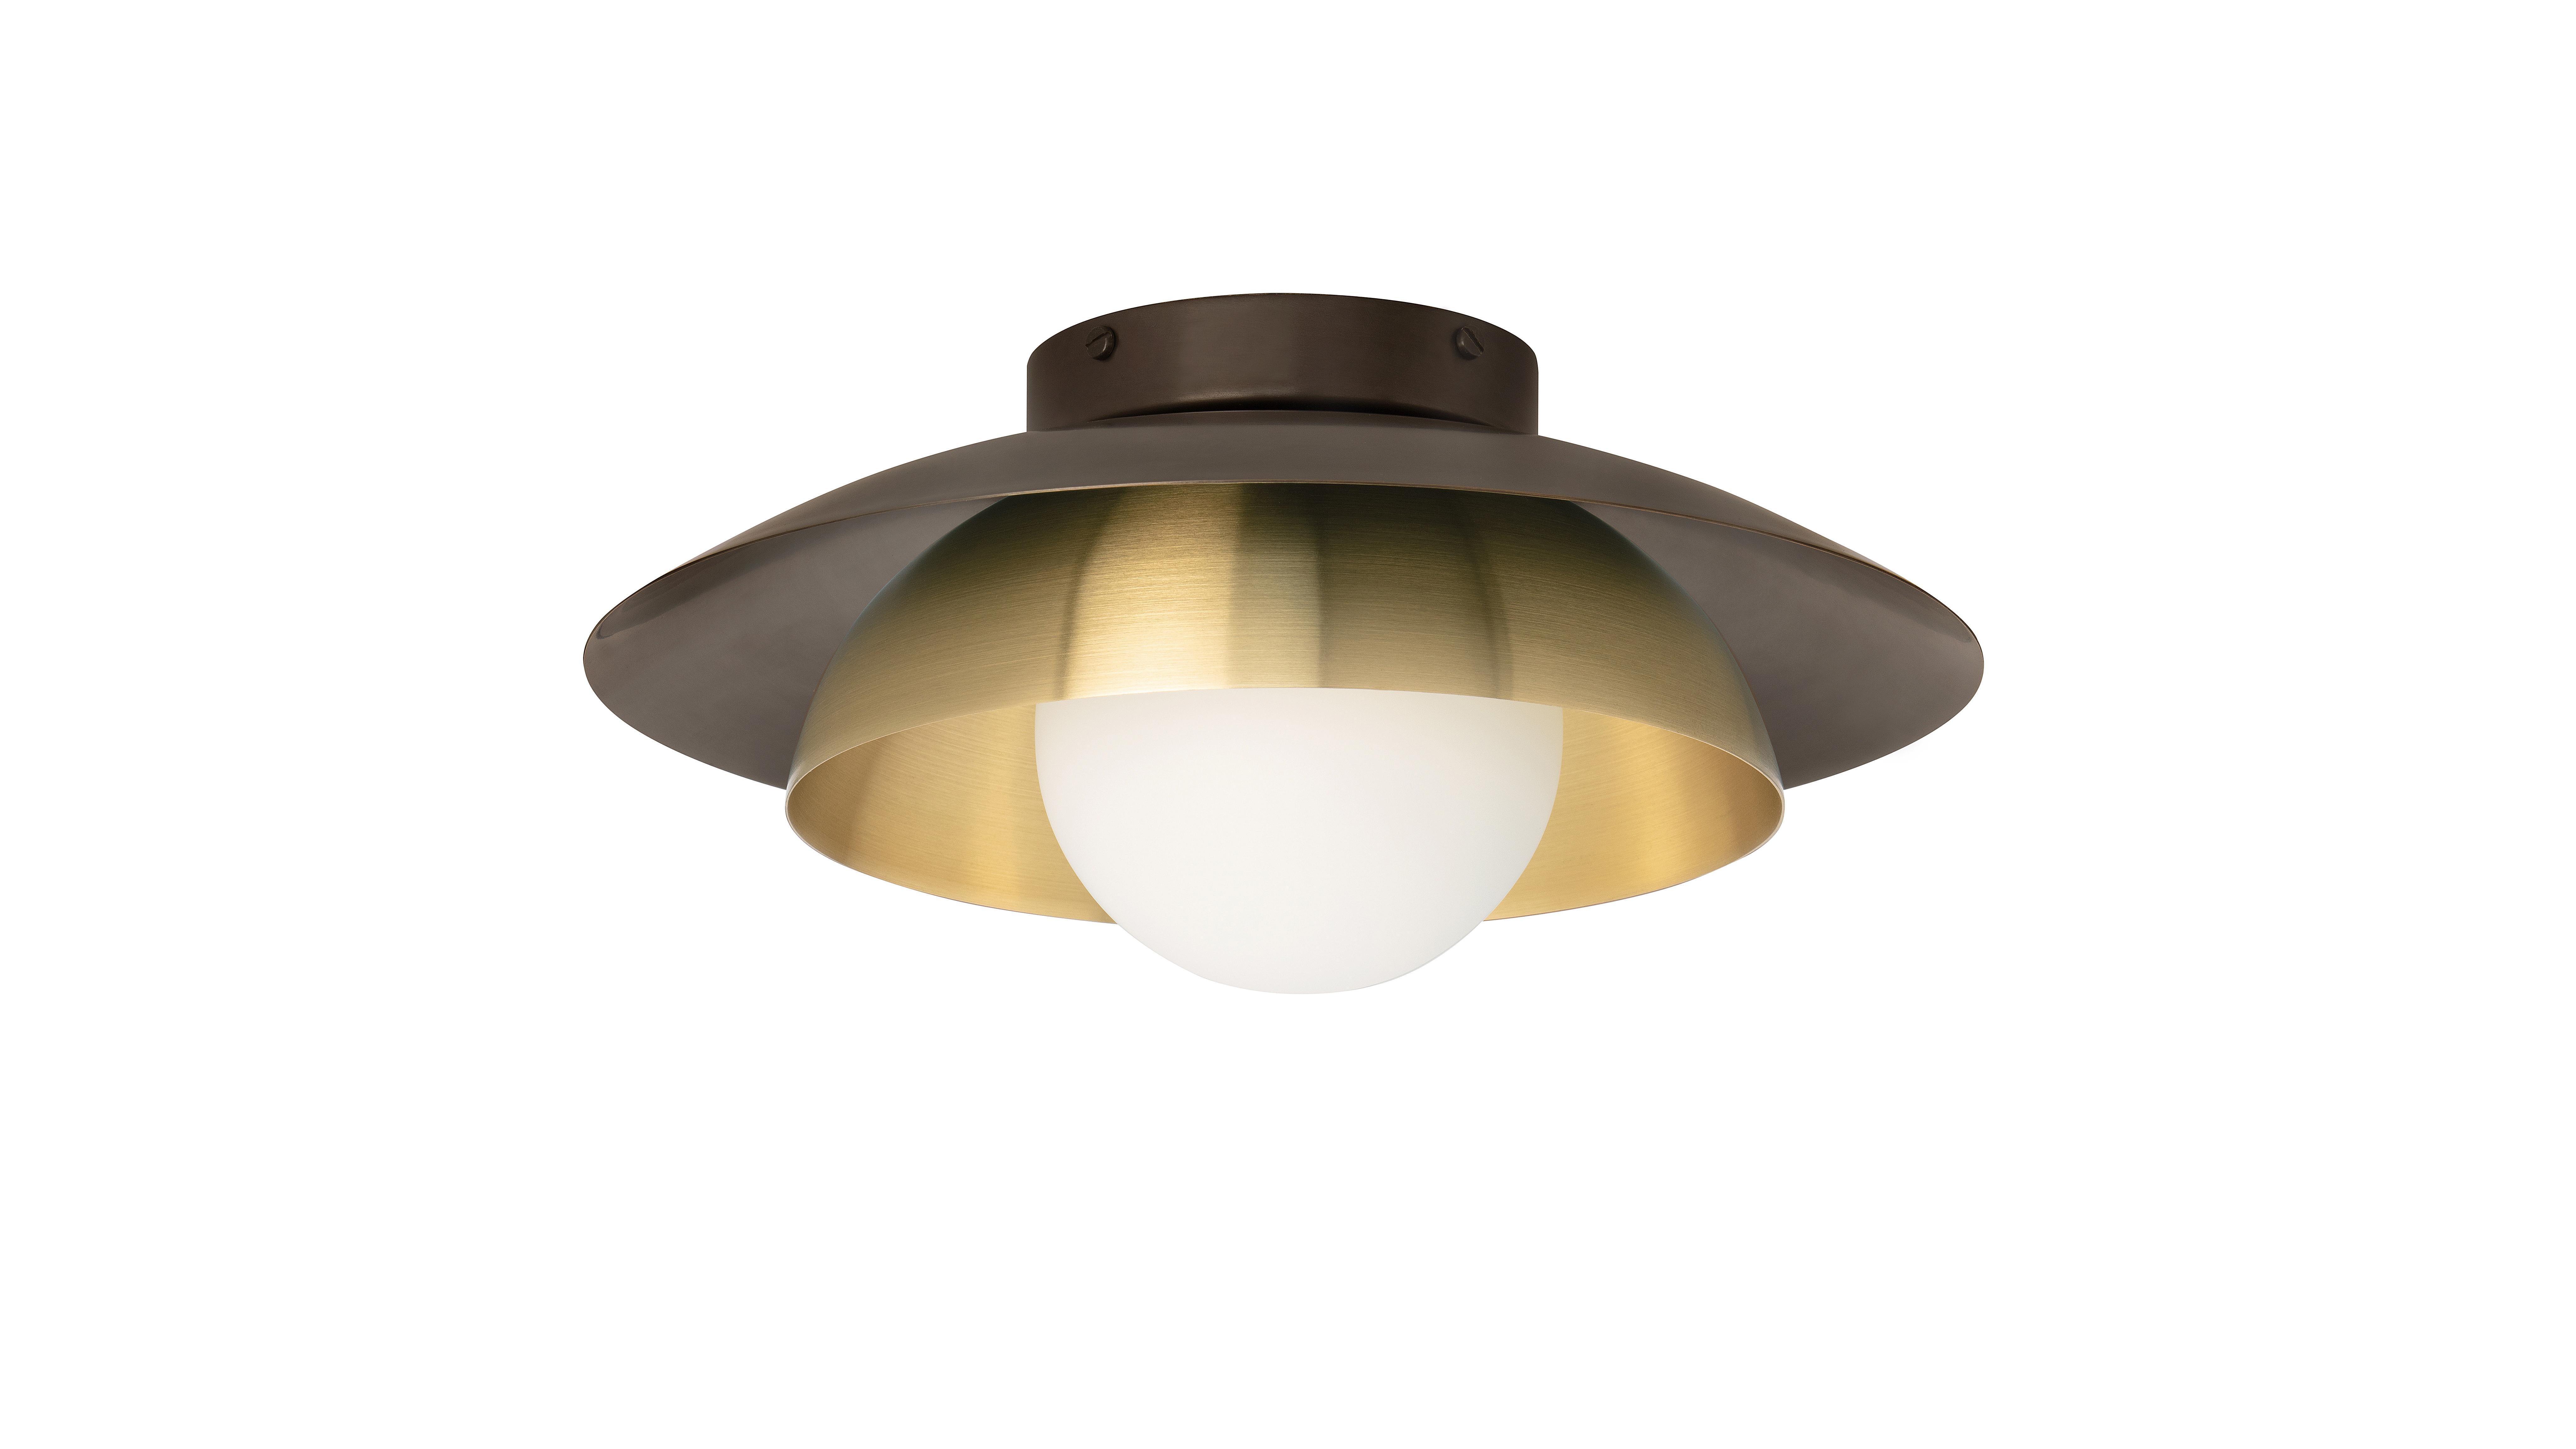 Carapace ceiling / wall-mount lamp by CTO Lighting
Materials: bronze with satin brass, opal glass shade
Dimensions: H 16.5 x W 32 cm

All our lamps can be wired according to each country. If sold to the USA it will be wired for the USA for